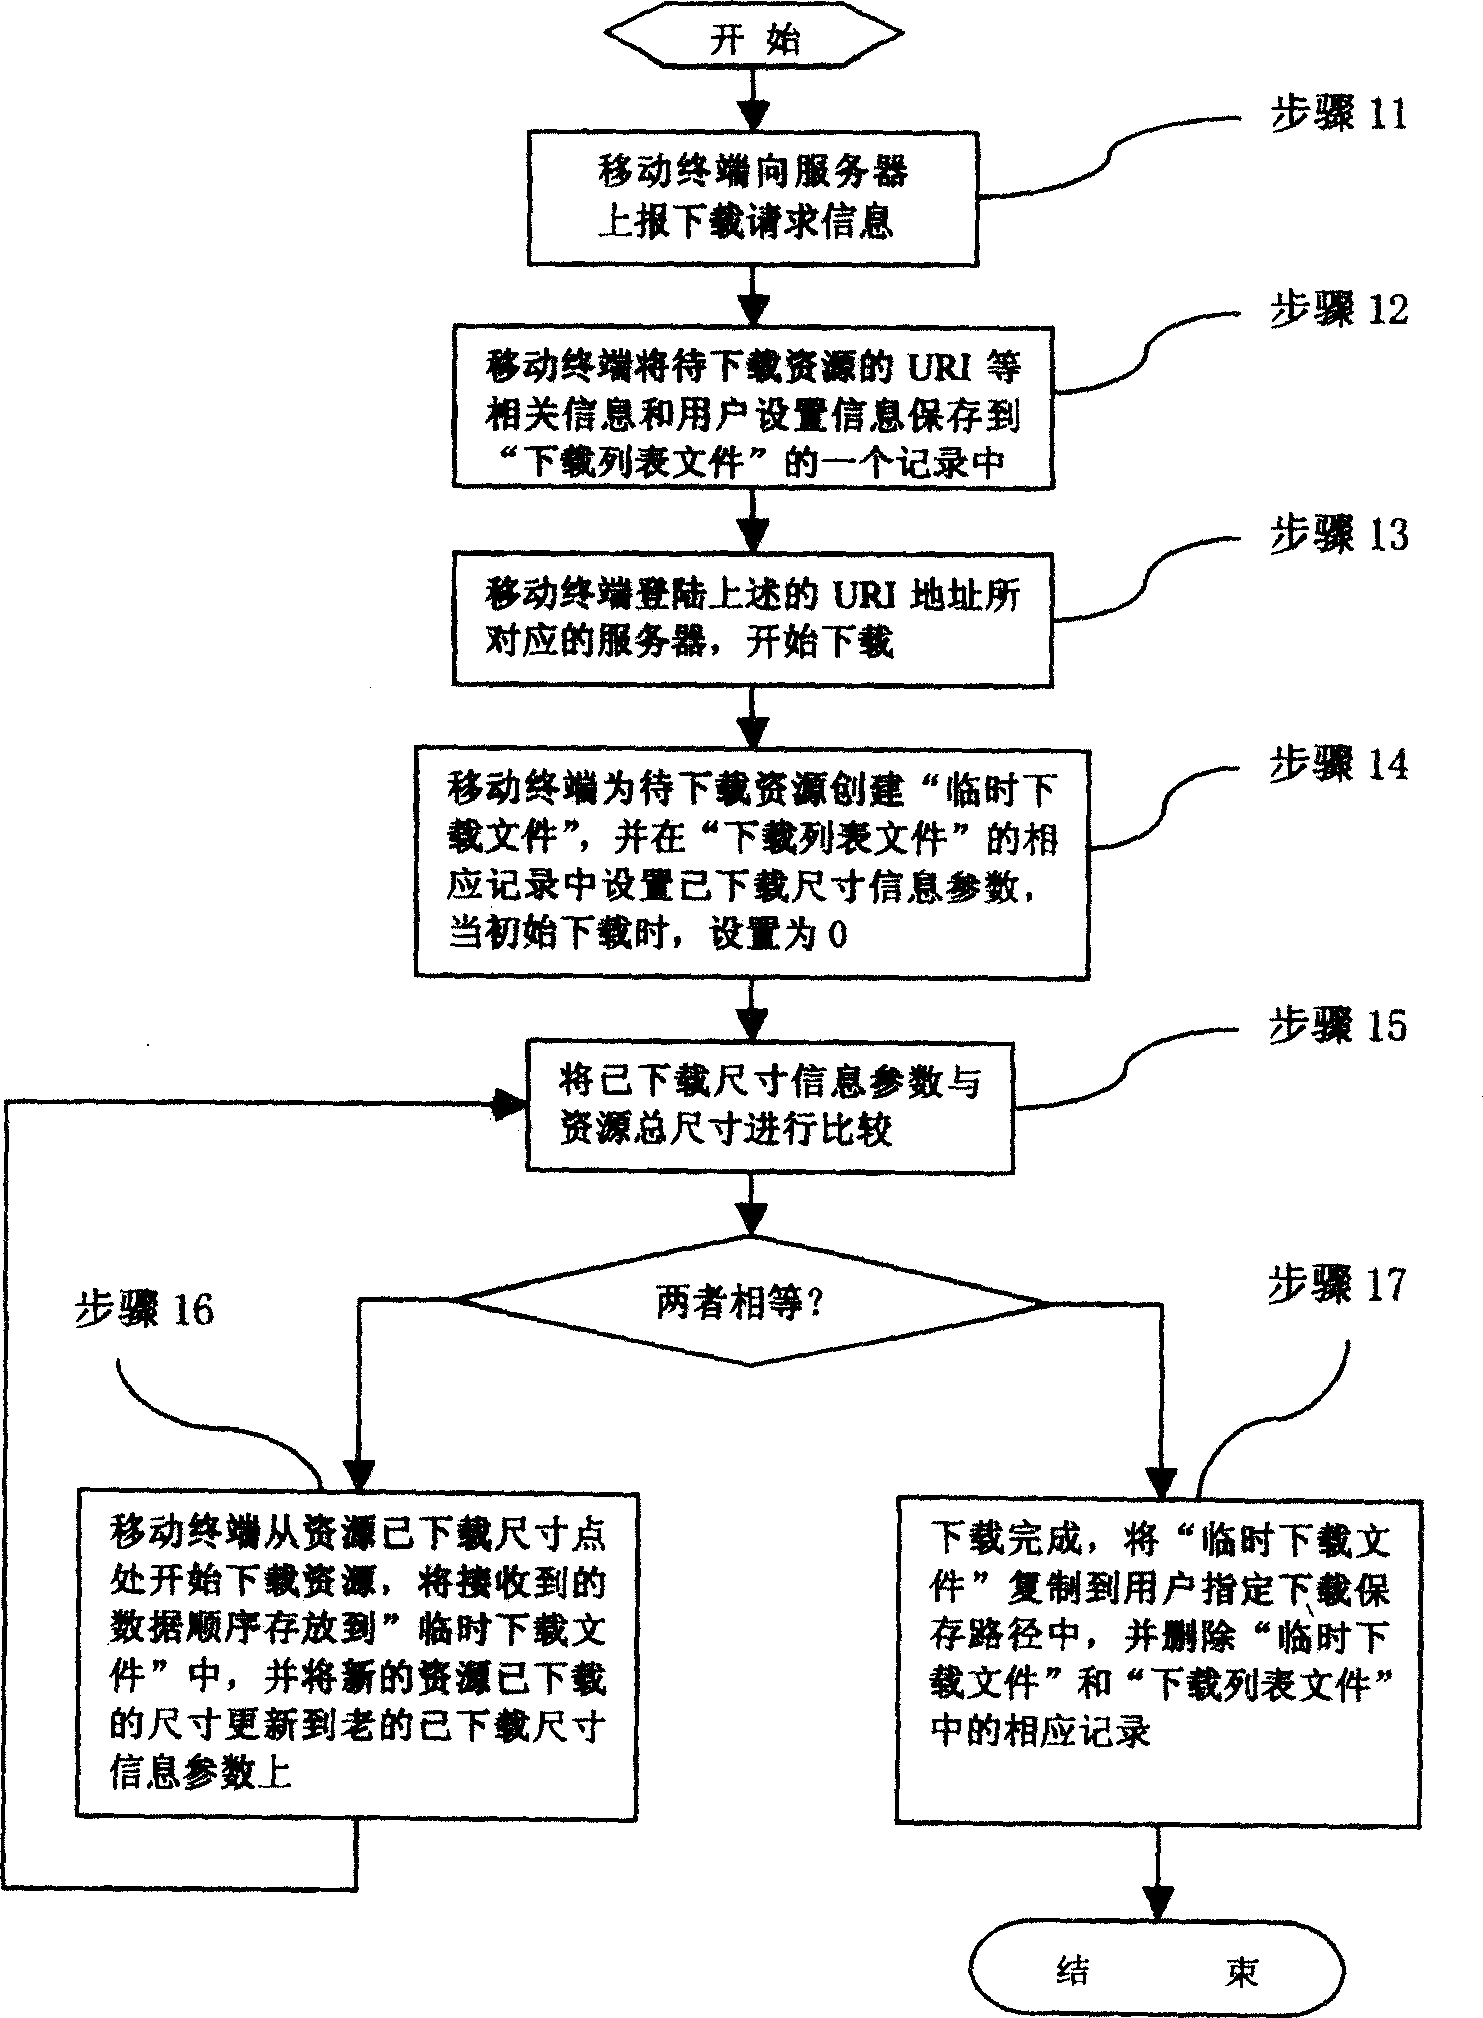 Method for down loading network resource using mobile terminal